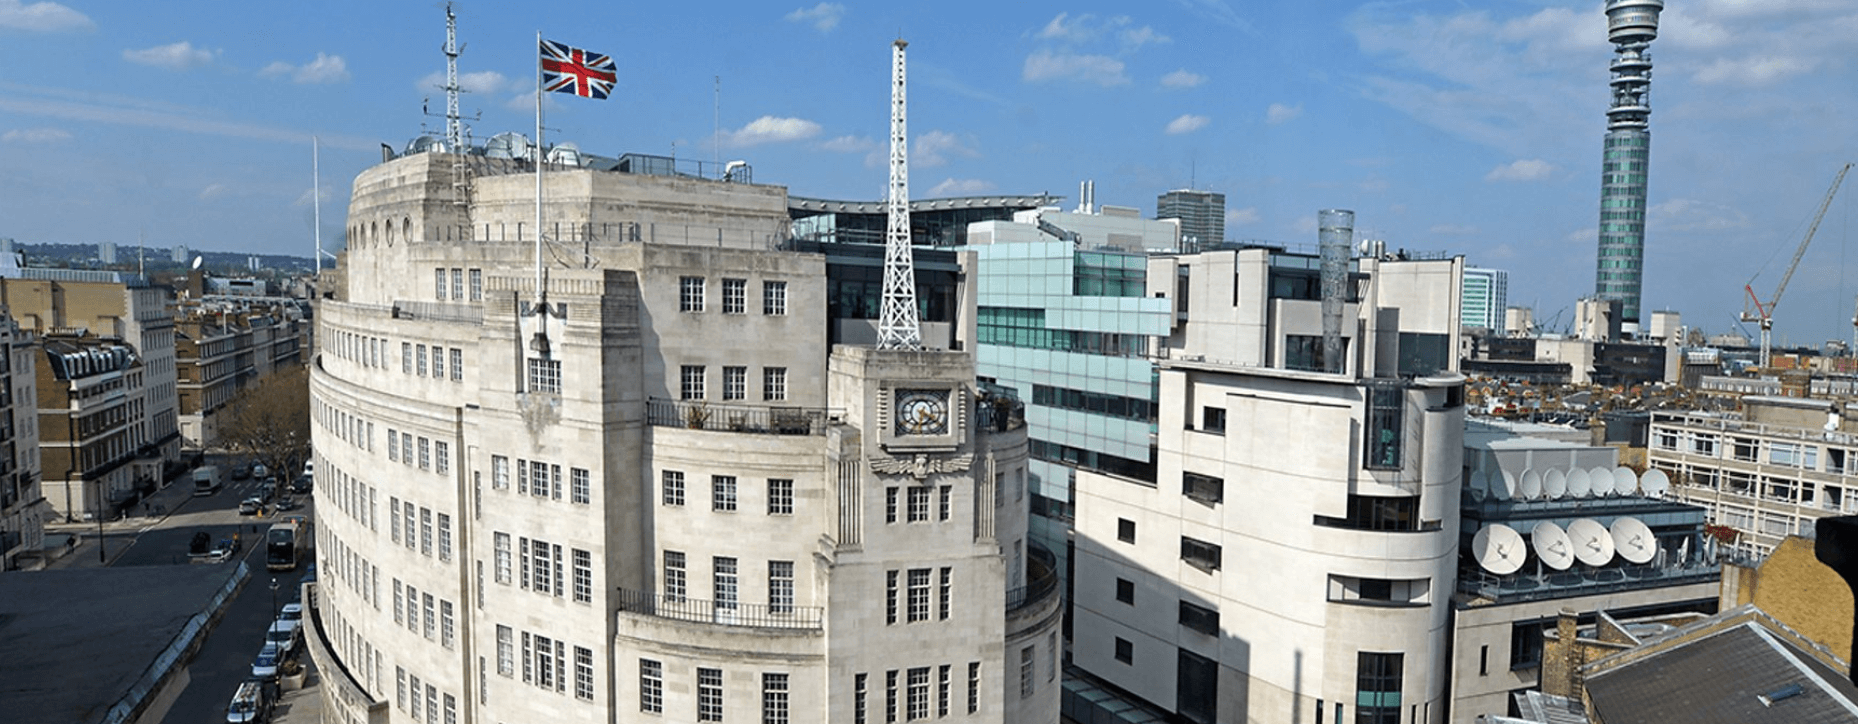 BBC (British Broadcasting Corporation)  Mission and Vision Statements Analysis